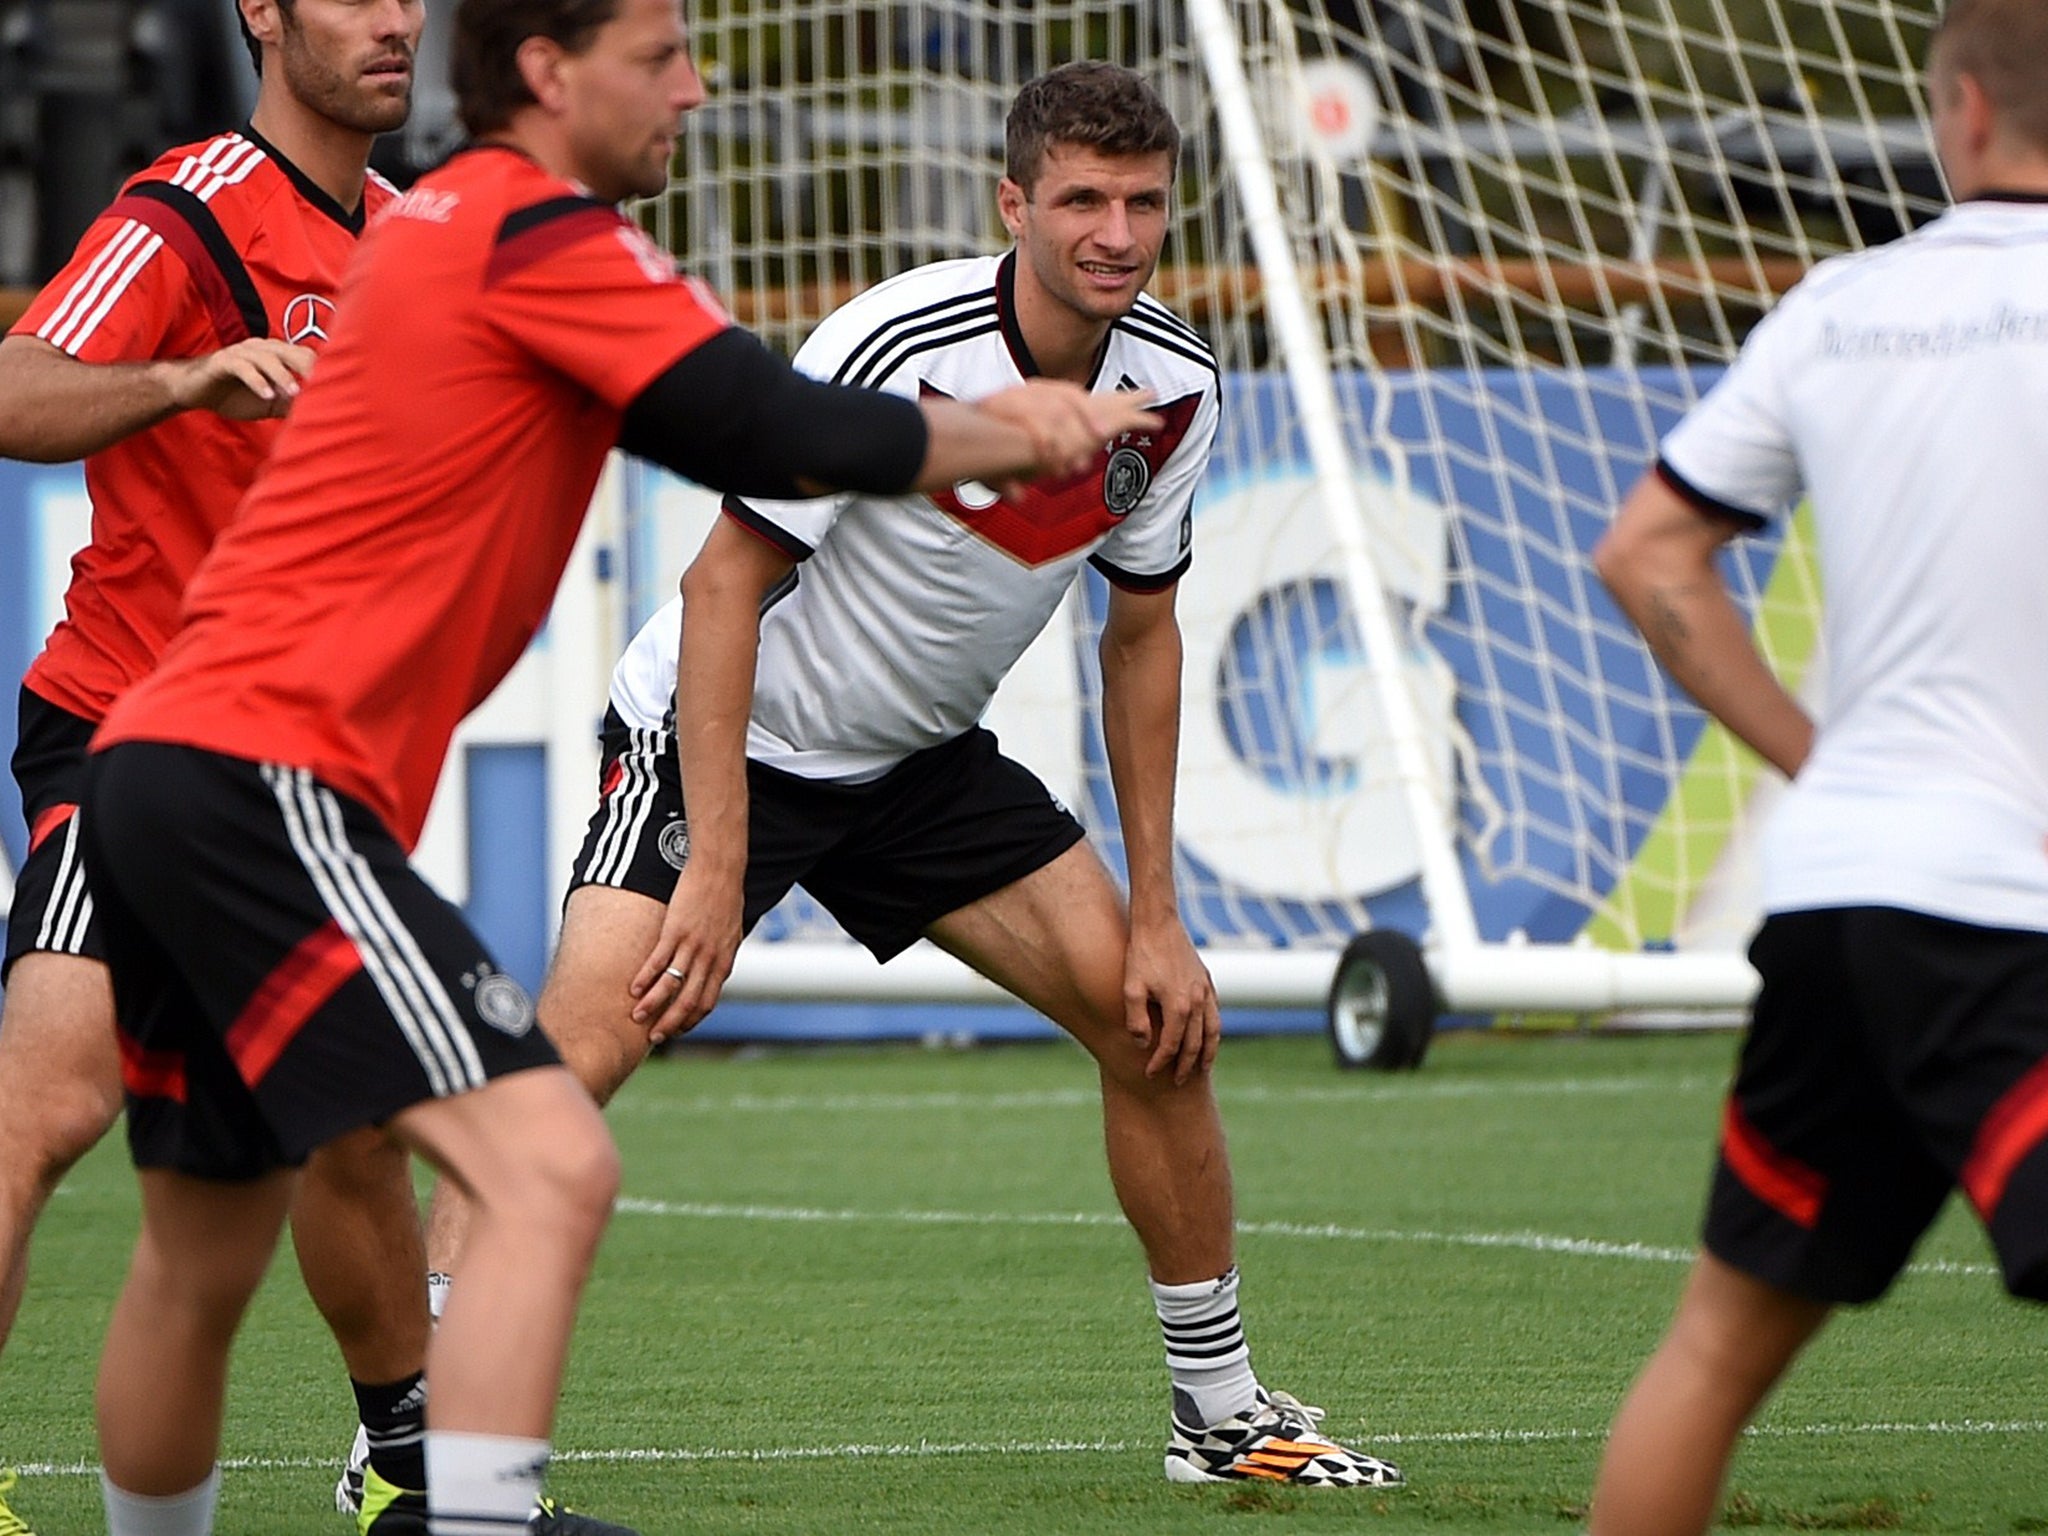 Thomas Muller trains with Germany ahead of the World Cup final